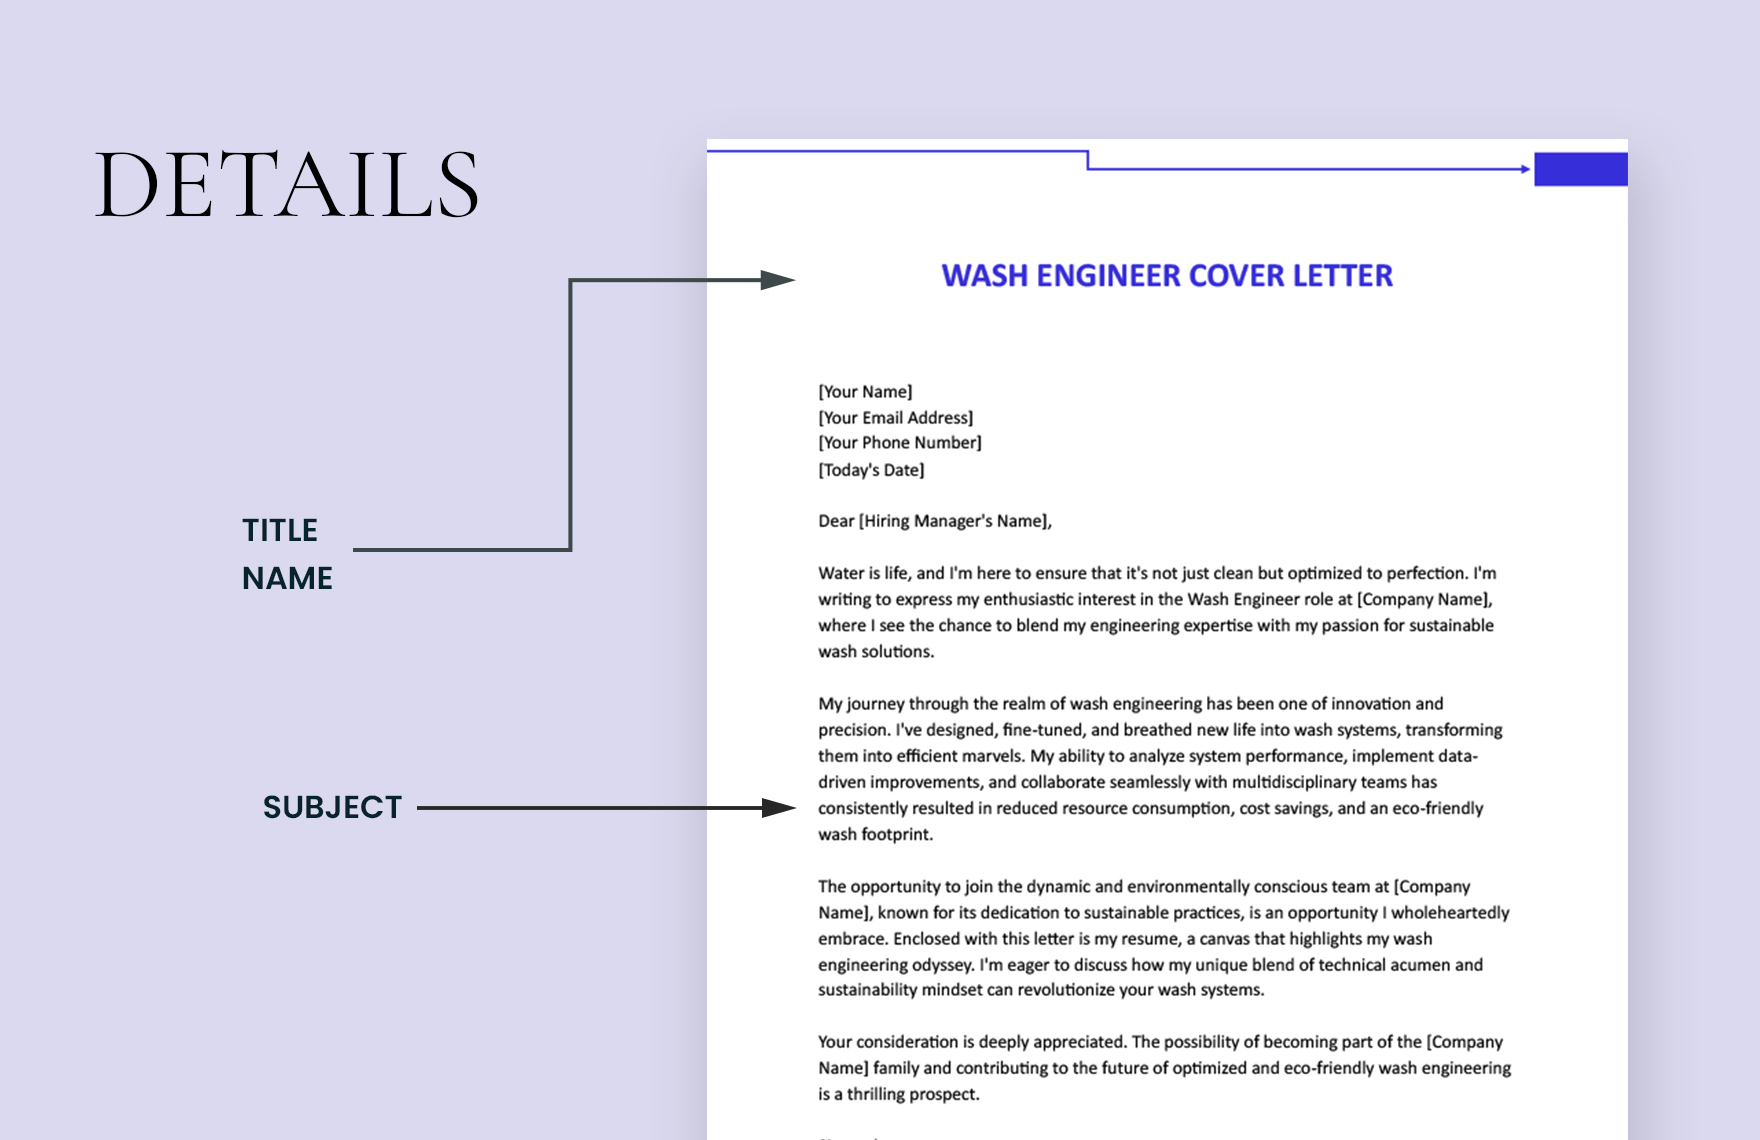 Wash Engineer Cover Letter